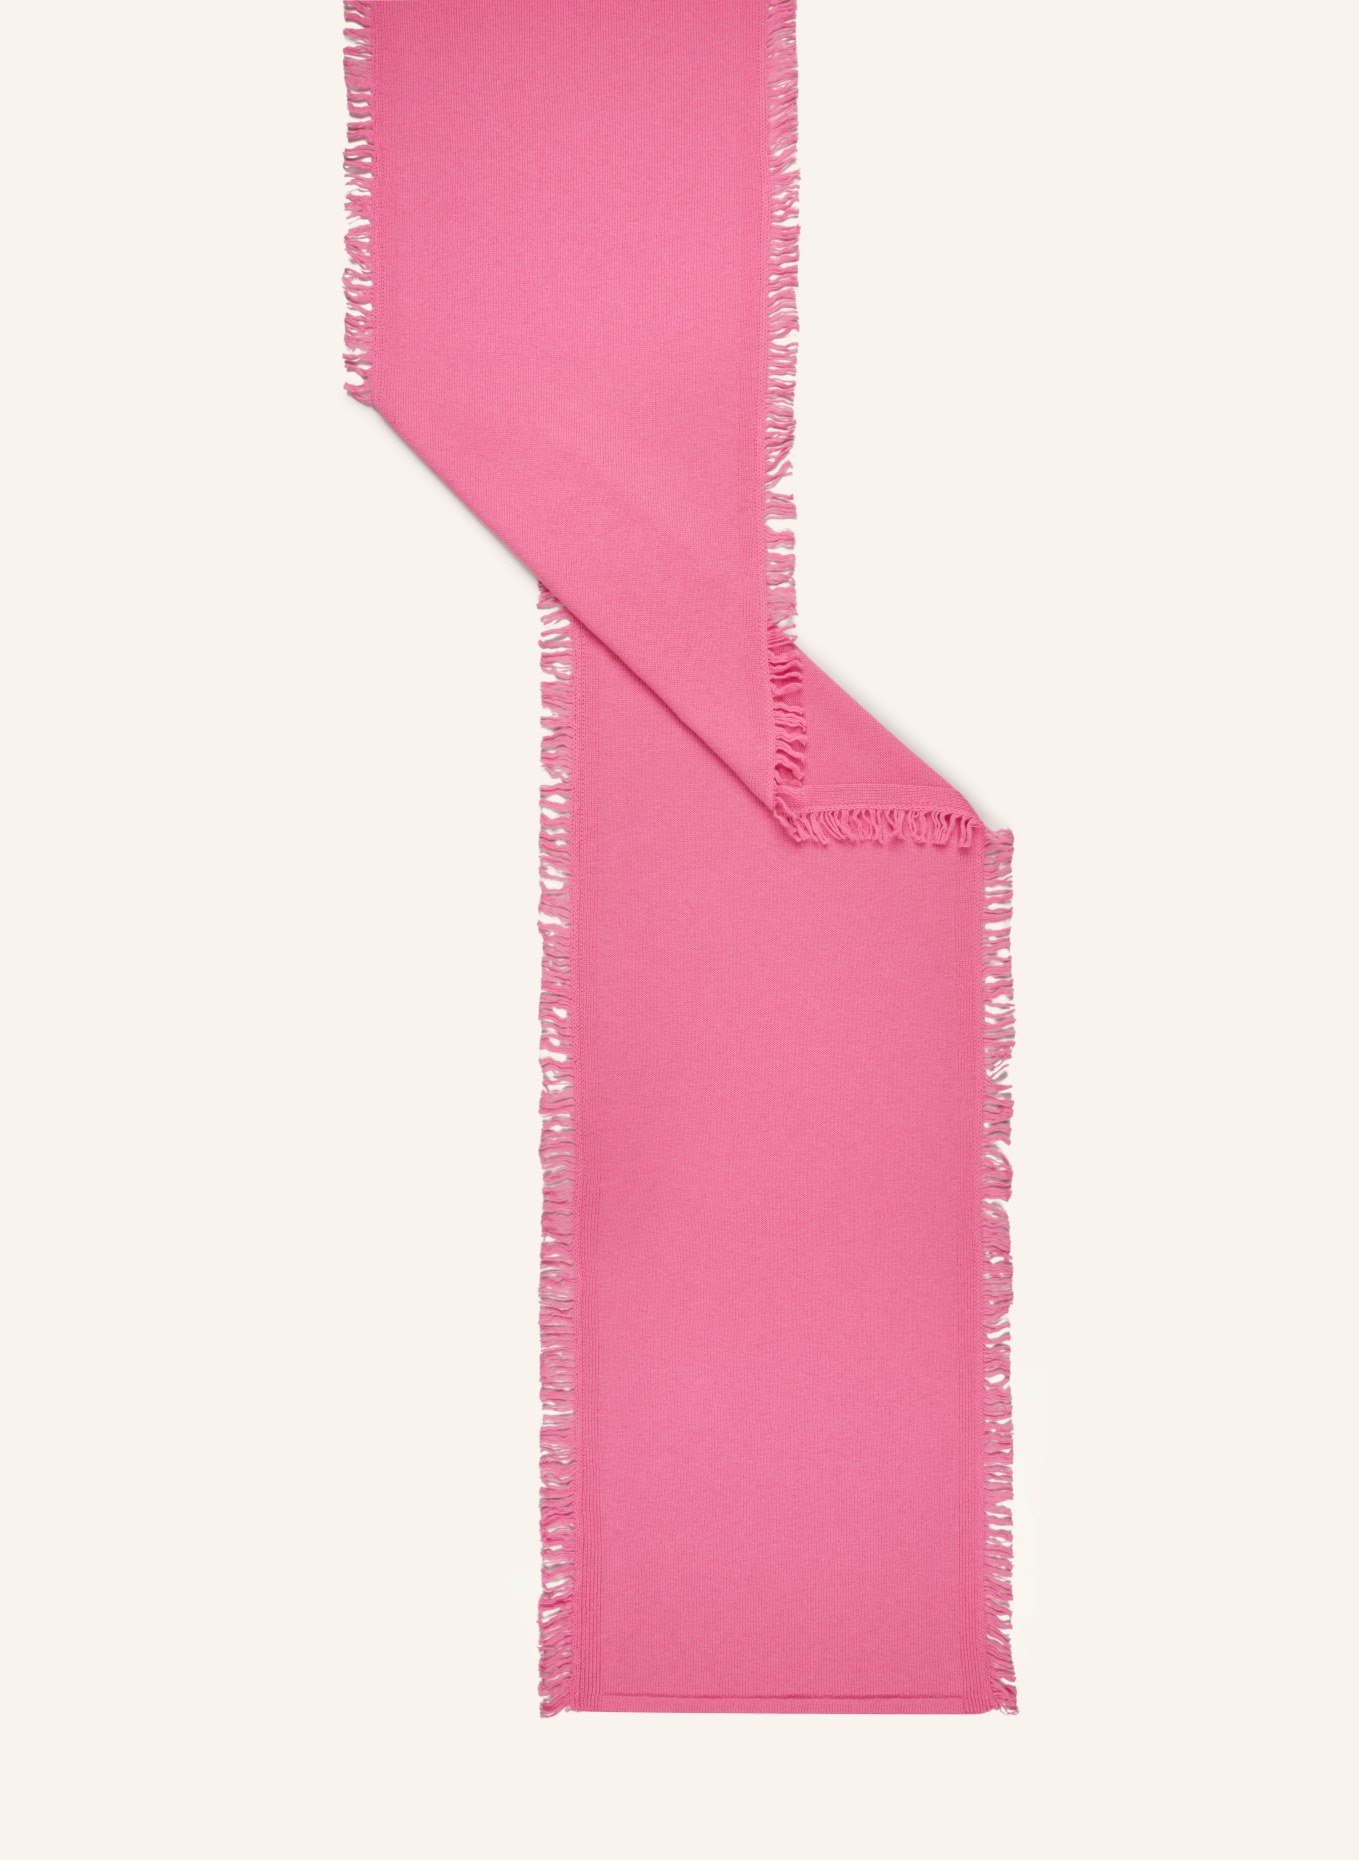 MAERZ MUENCHEN Scarf, Color: PINK (Image 2)